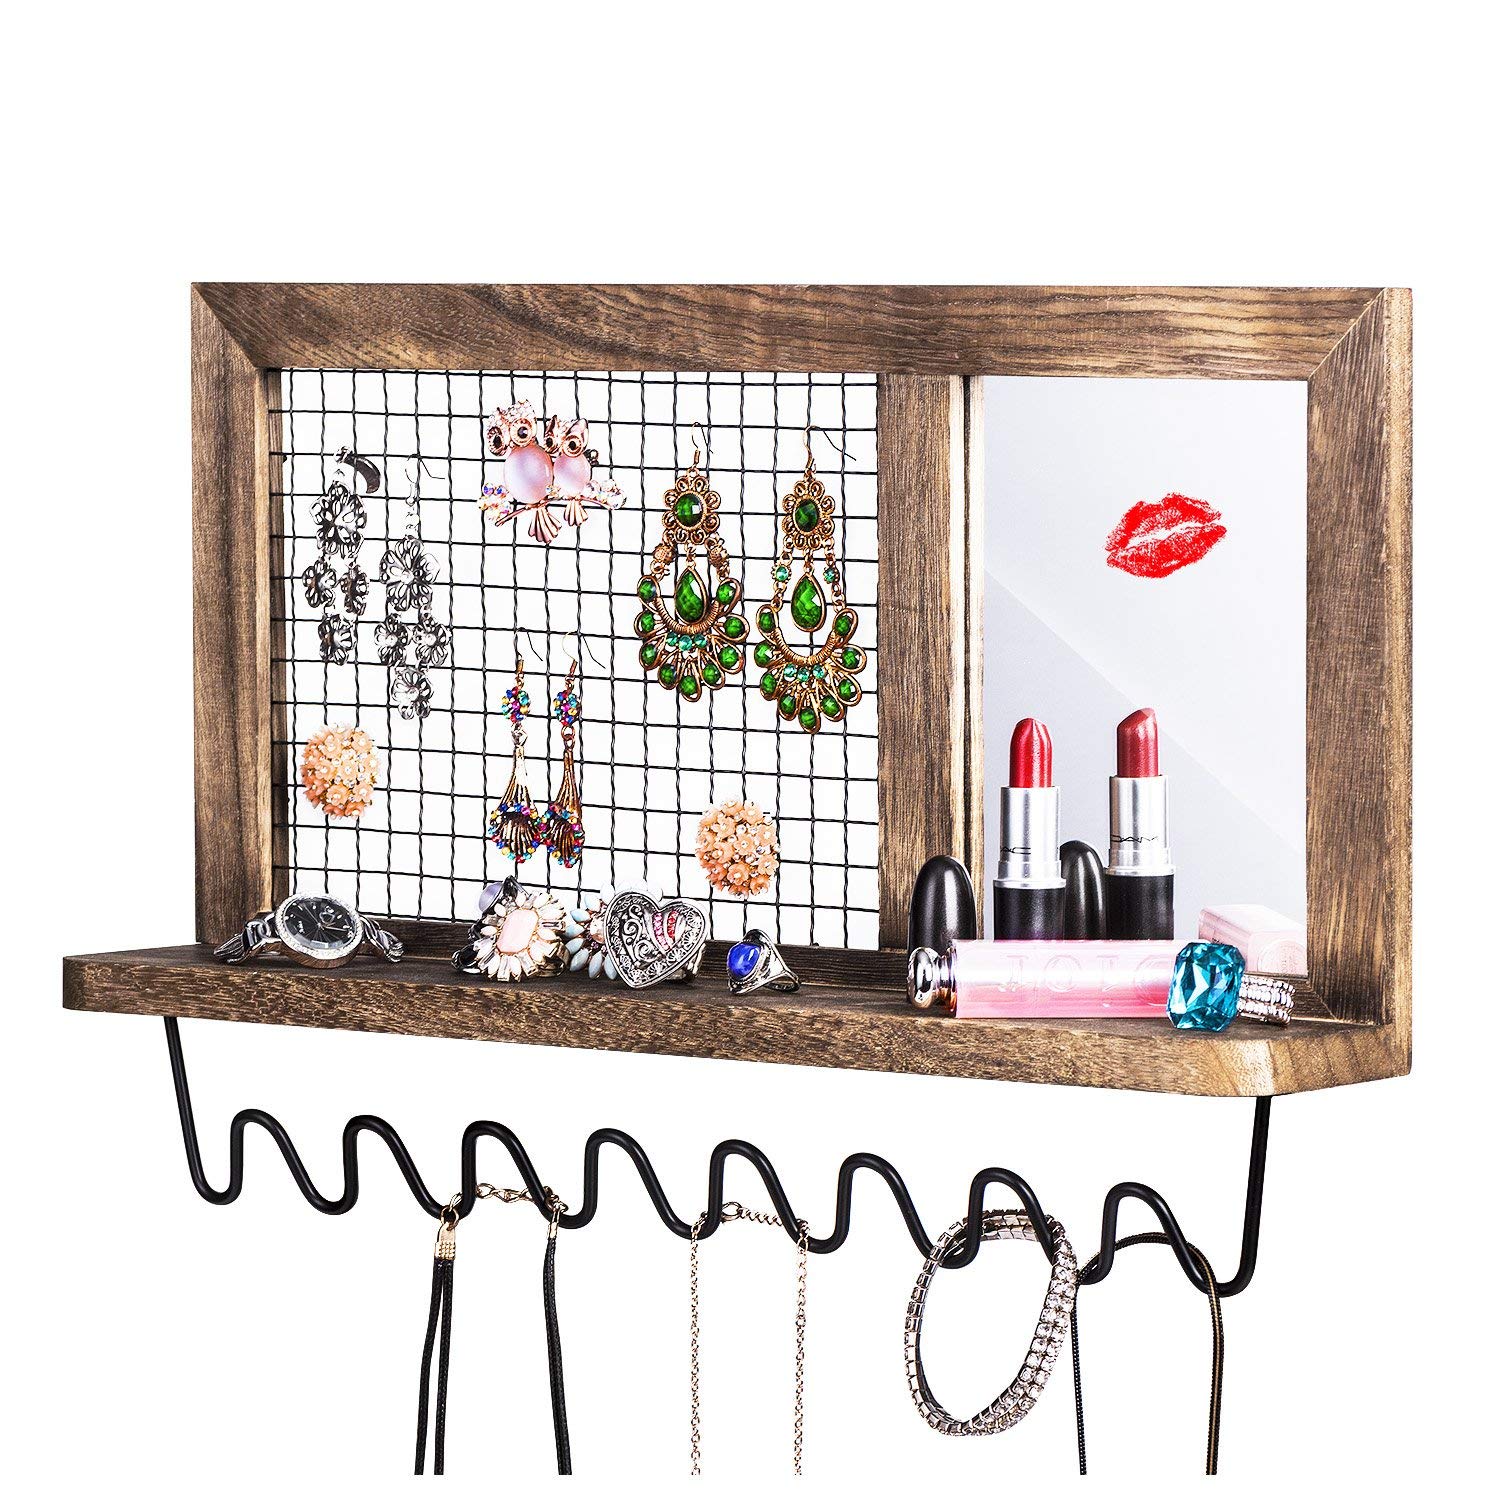 Jewelry Organizer, SRIWATANA Wall Mount Metal Wood Jewelry Holder, Necklace, Earrings, Rings, Lipstick Holder Organizer with Makeup Mirror